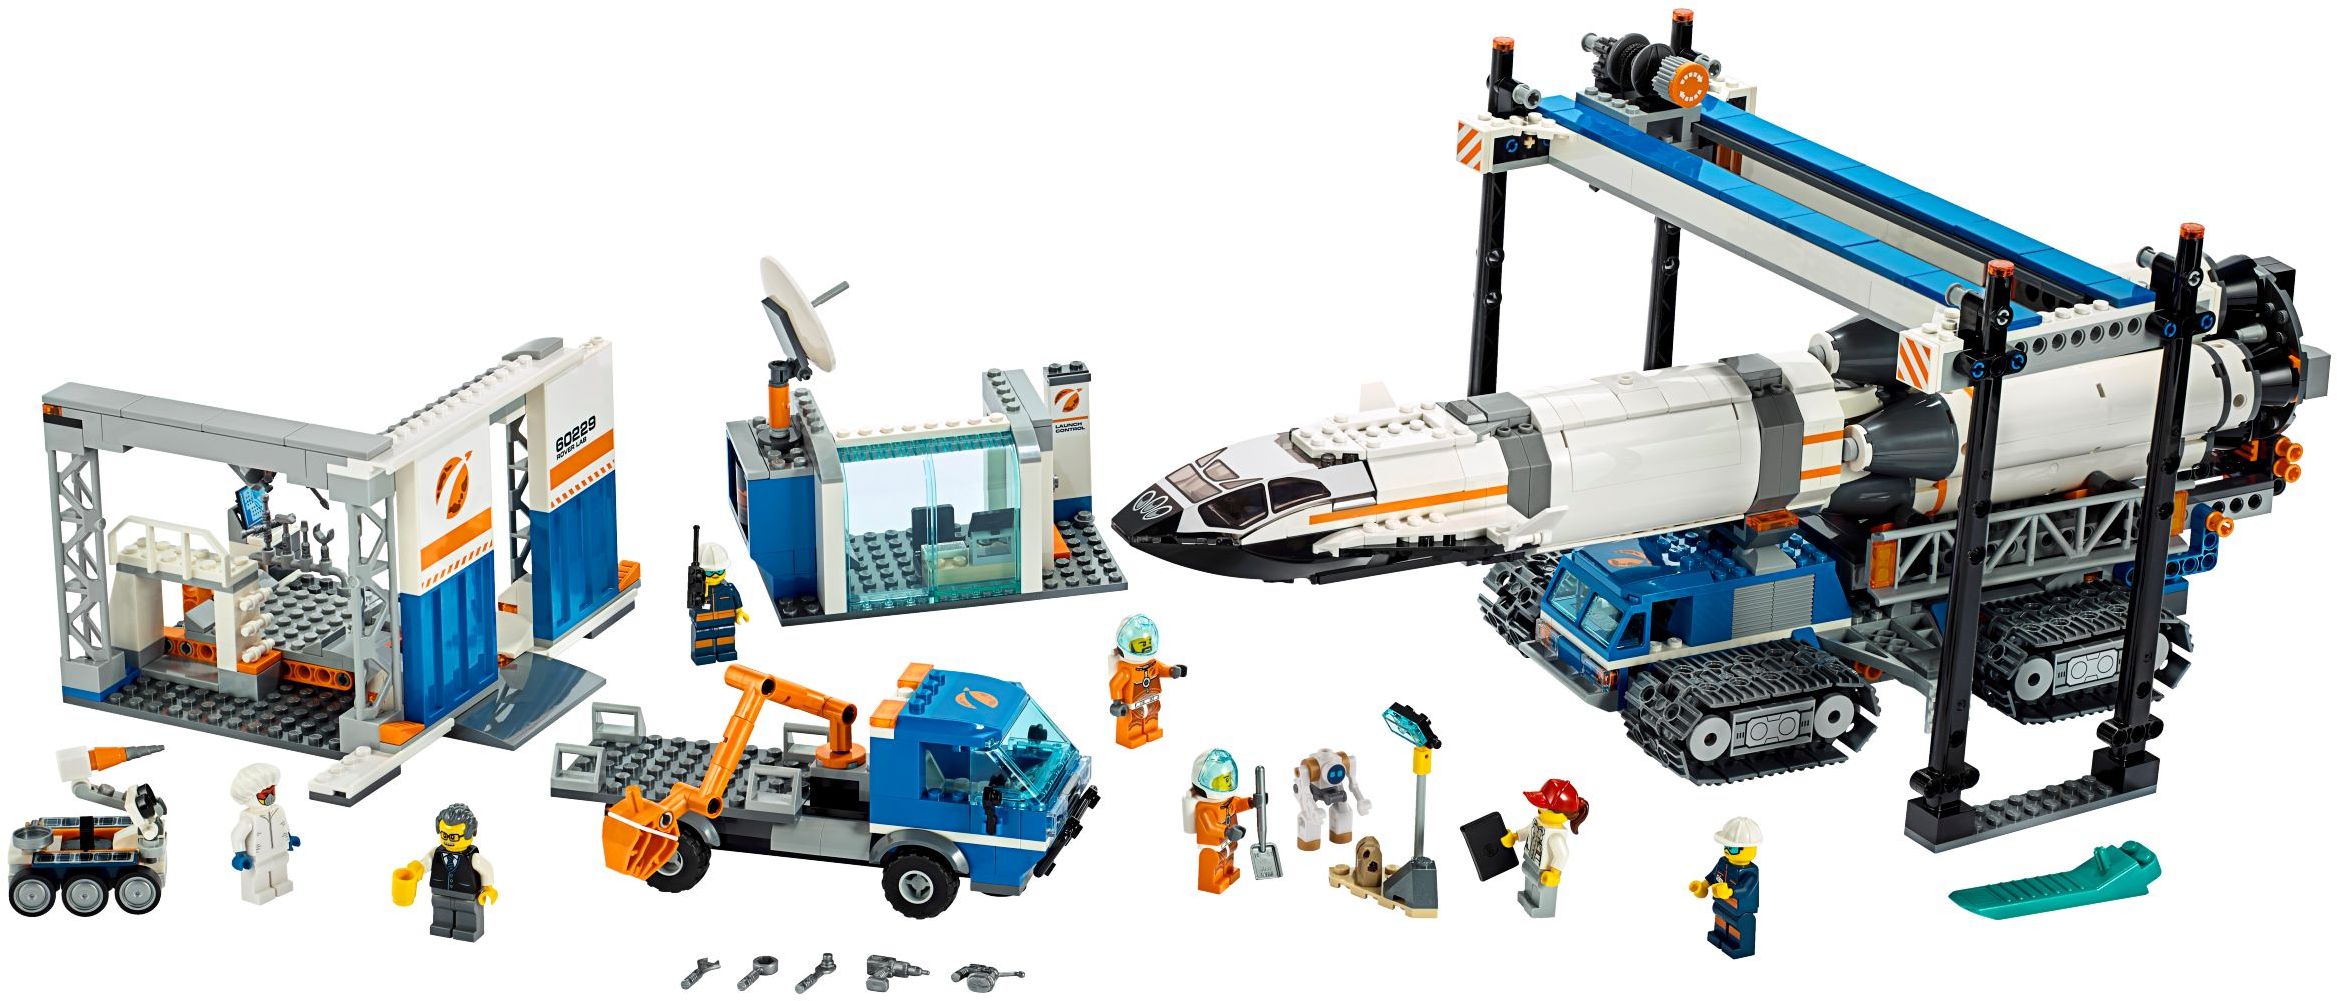 lego summer 2019 space sets